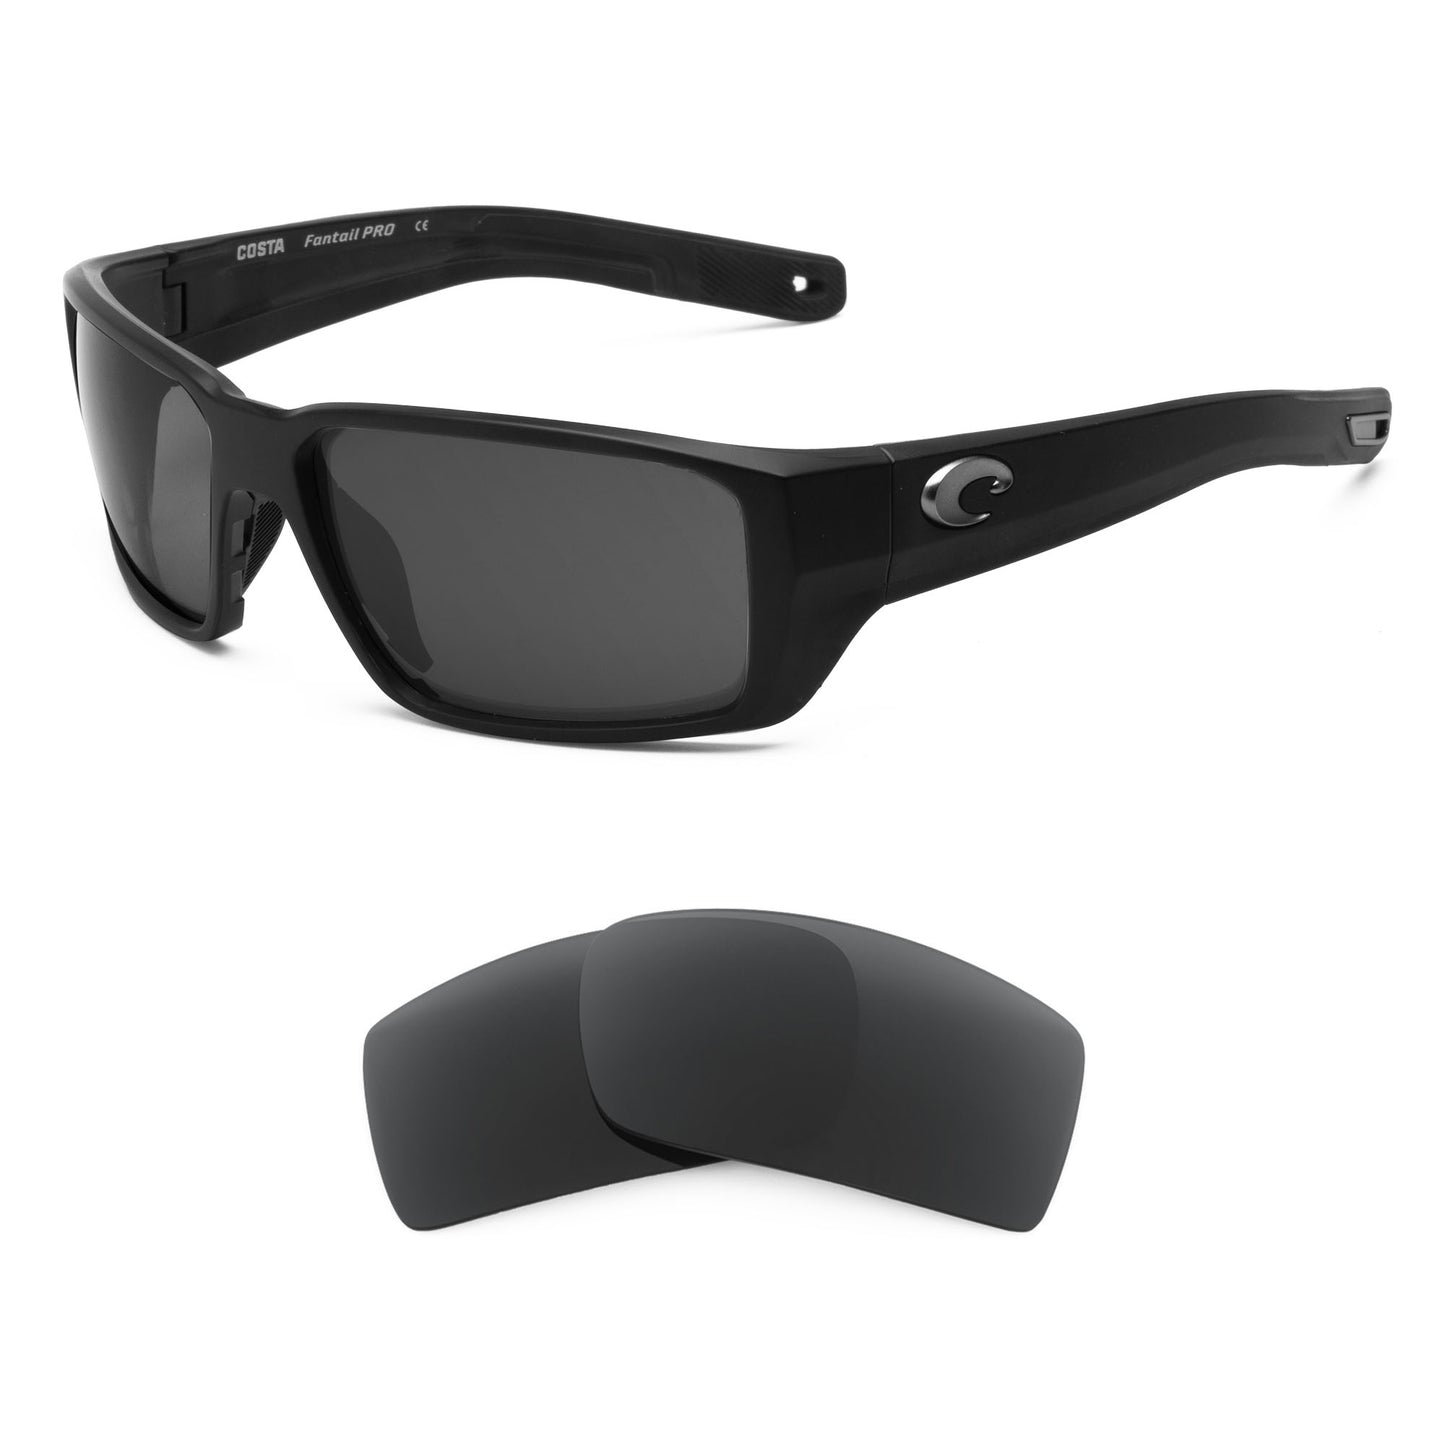 Costa Fantail Pro sunglasses with replacement lenses